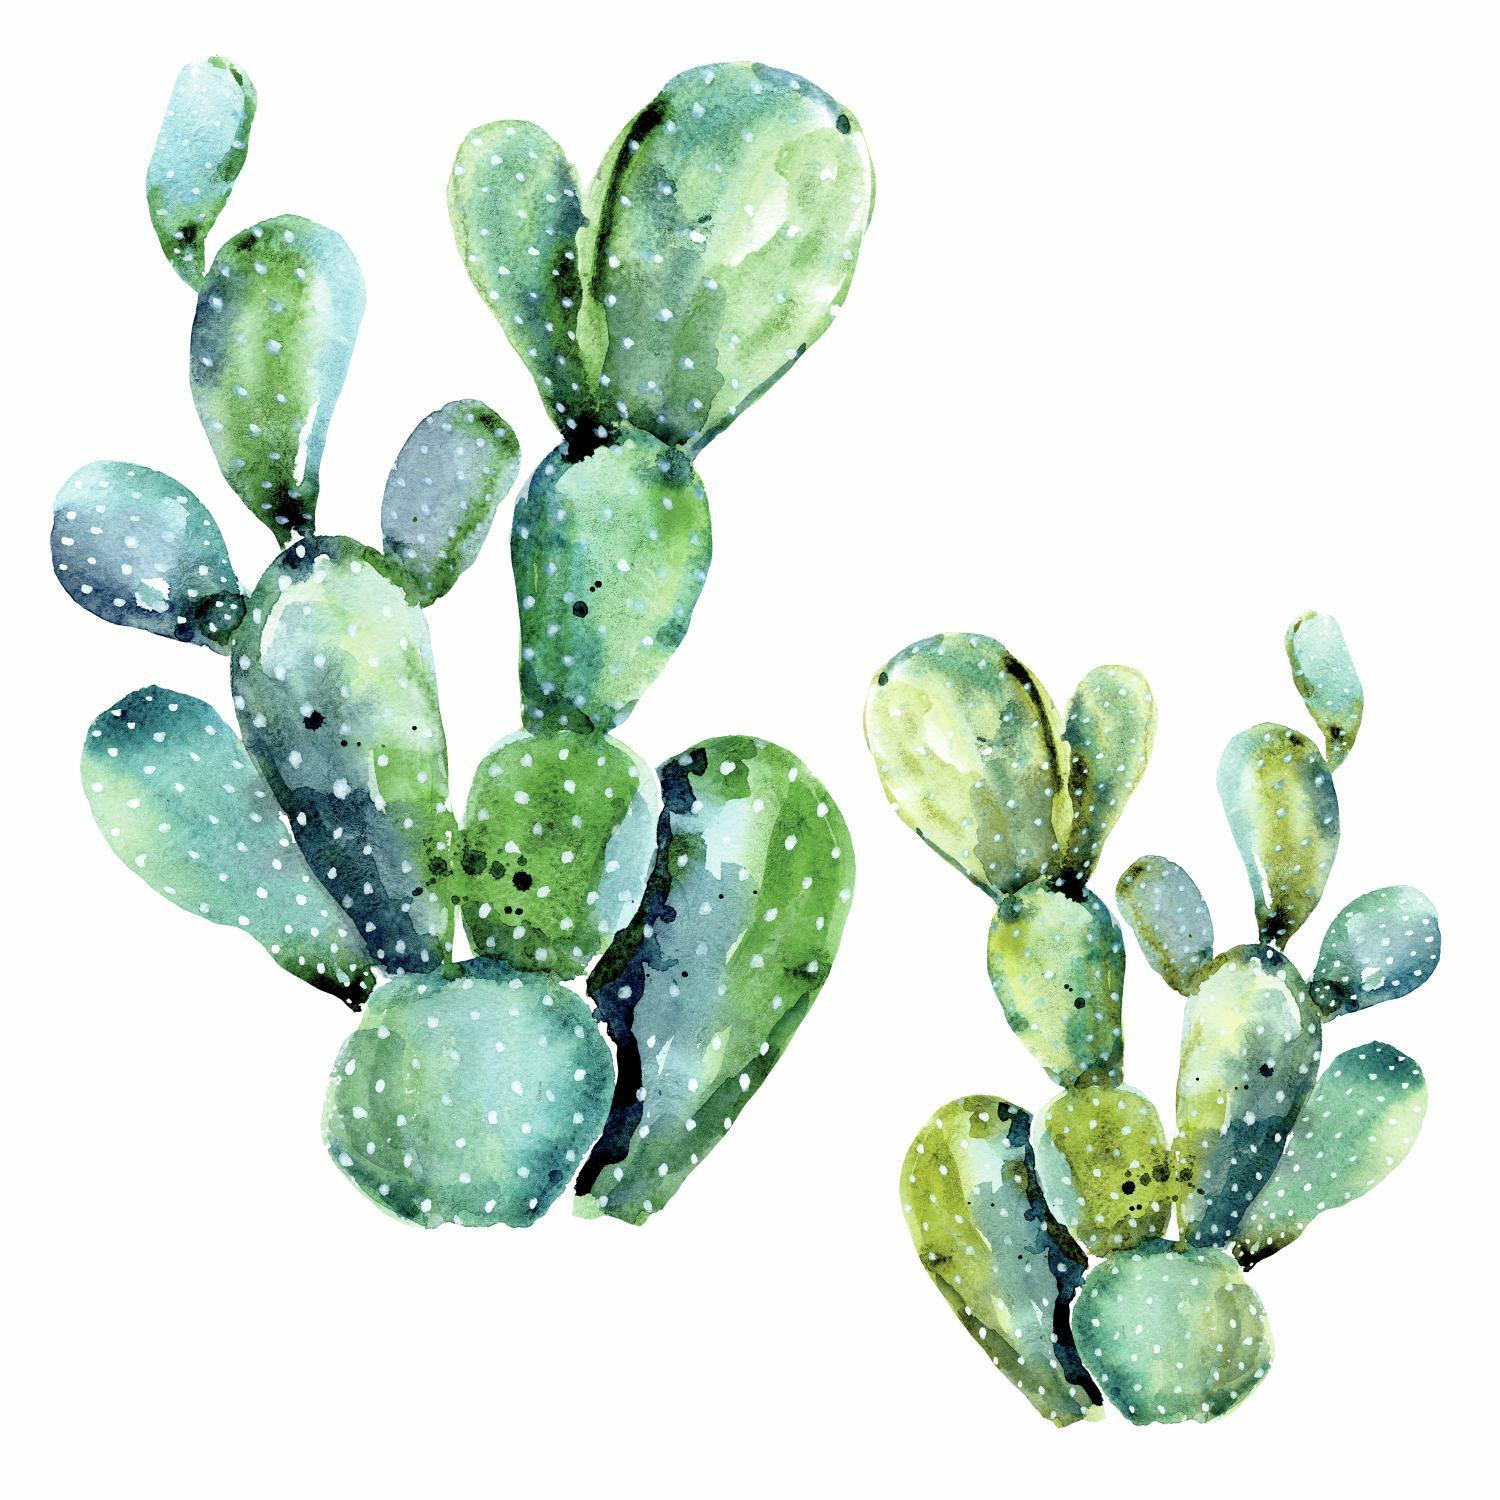 Watercolor Cactus Peel And Stick Giant Wall Decals